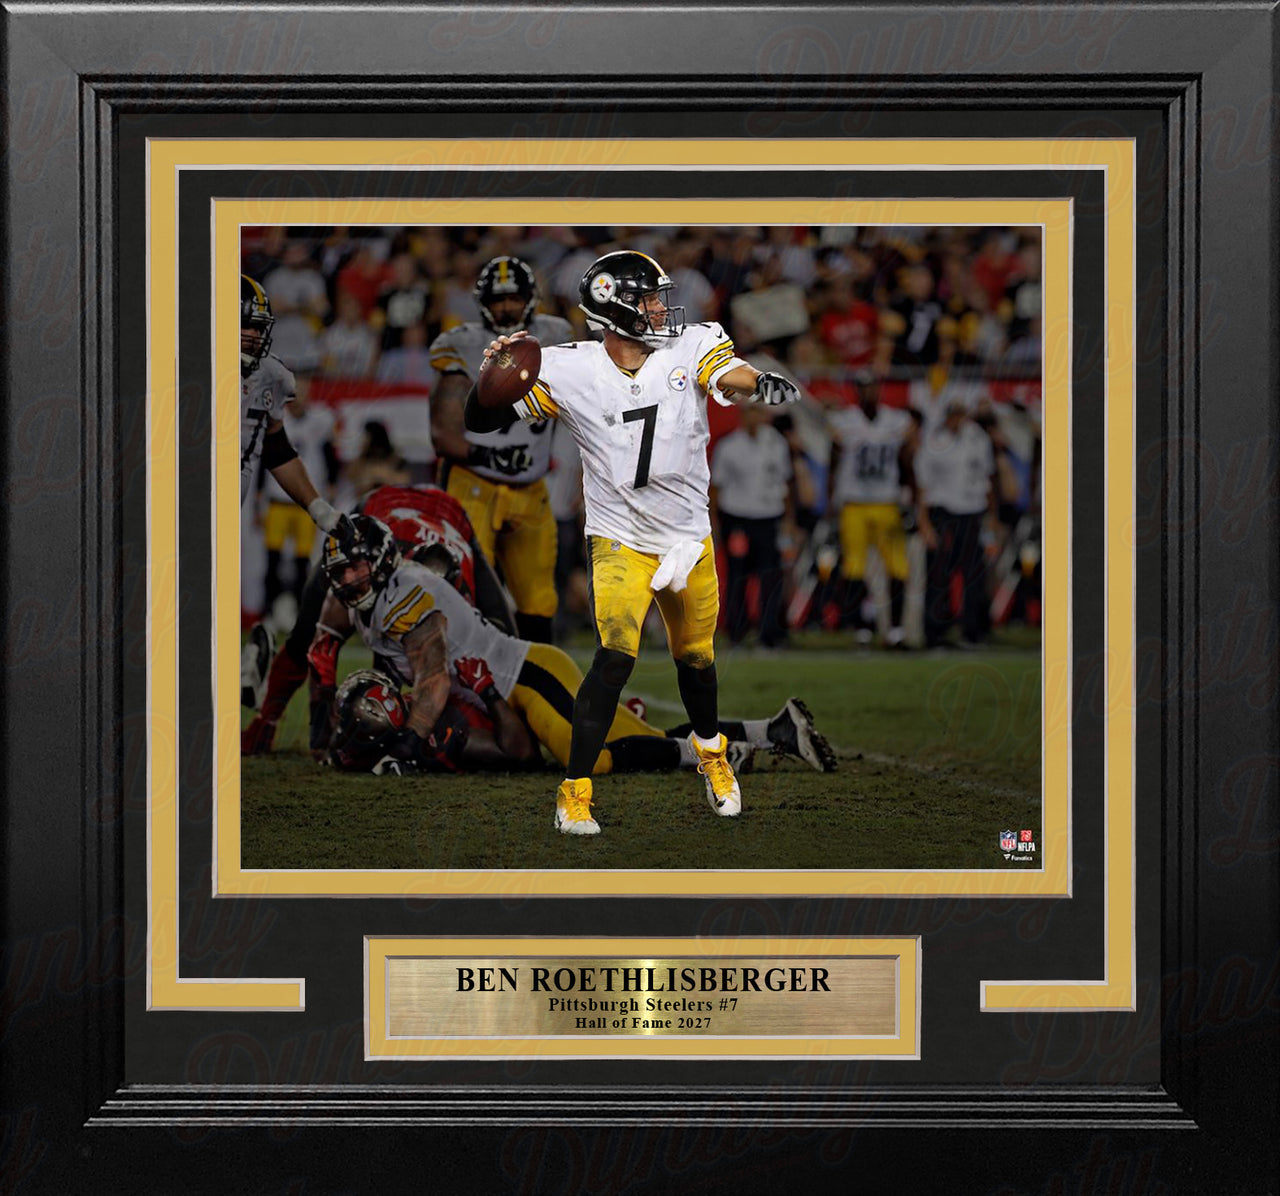 Ben Roethlisberger Blackout Action Pittsburgh Steelers 8" x 10" Framed Football Photo